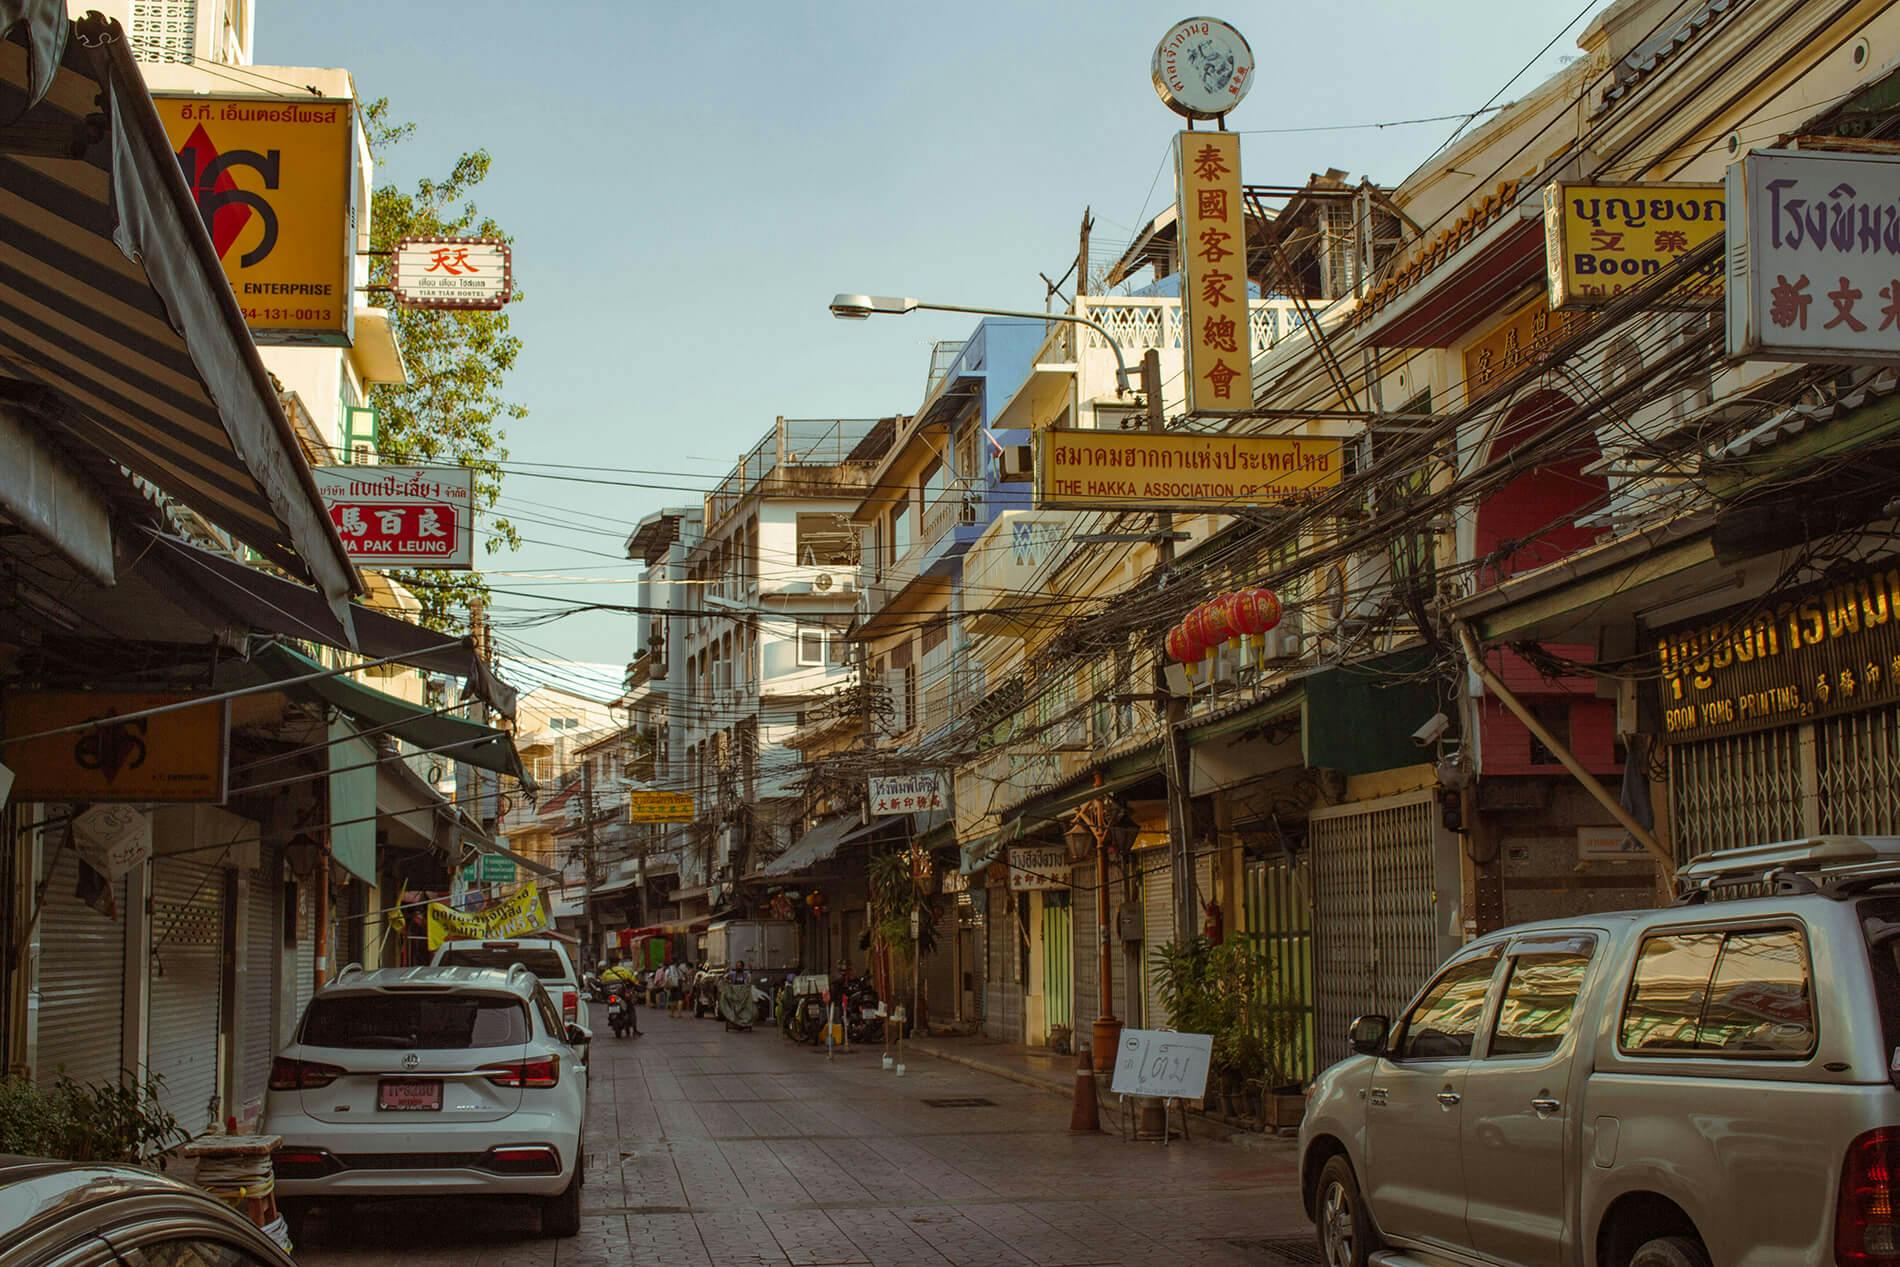 Image of Chinatown, Bangkok. There are a few cars on the road and many signs from various shops. Most signs are in Chinese and they are yellow with the text in a bold red